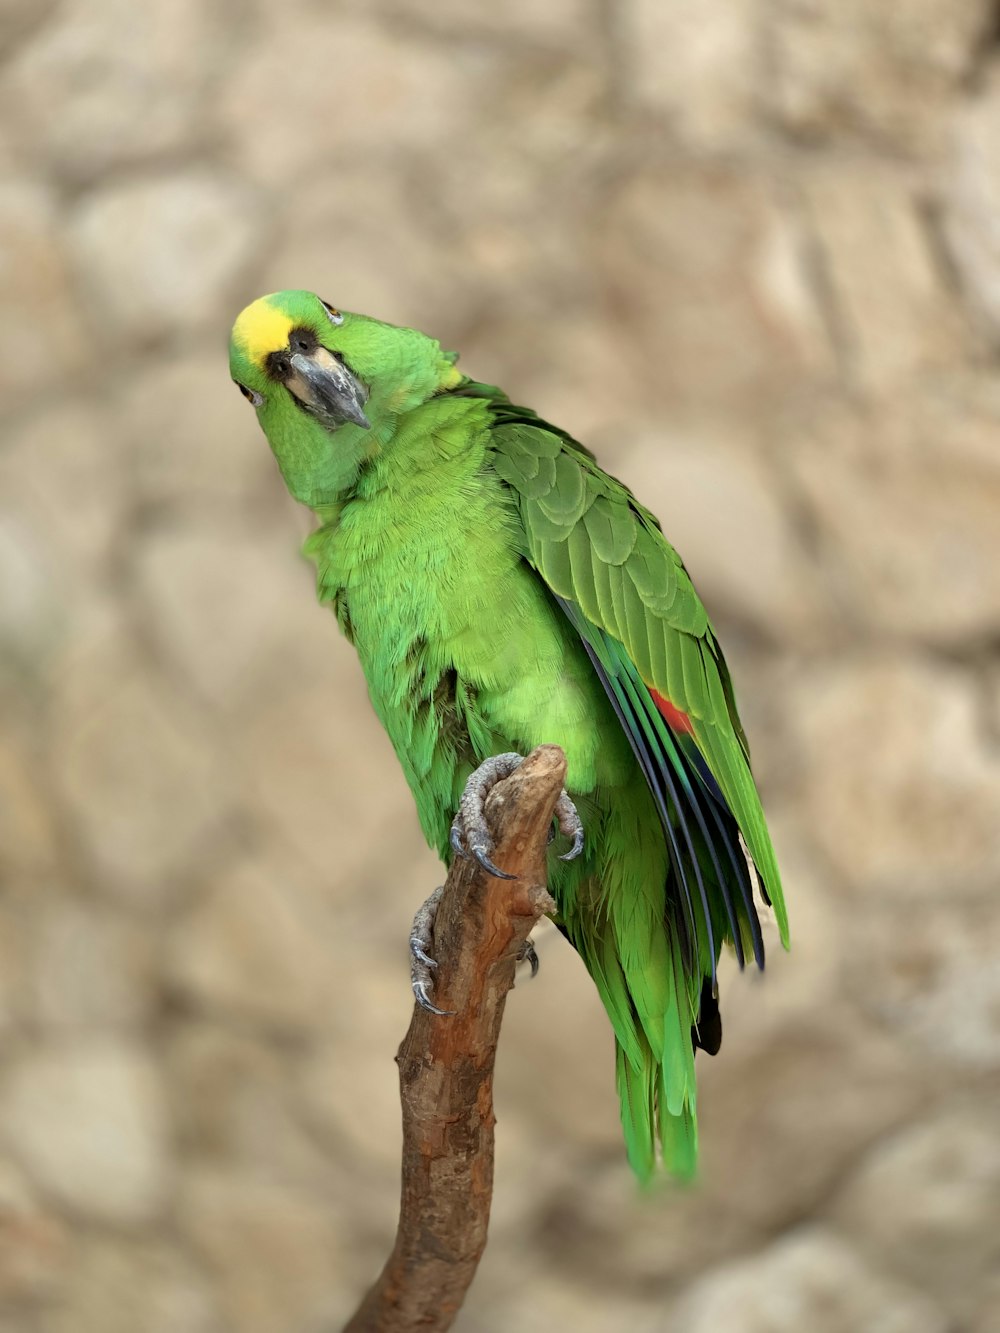 a green parrot sitting on a branch with a rock background